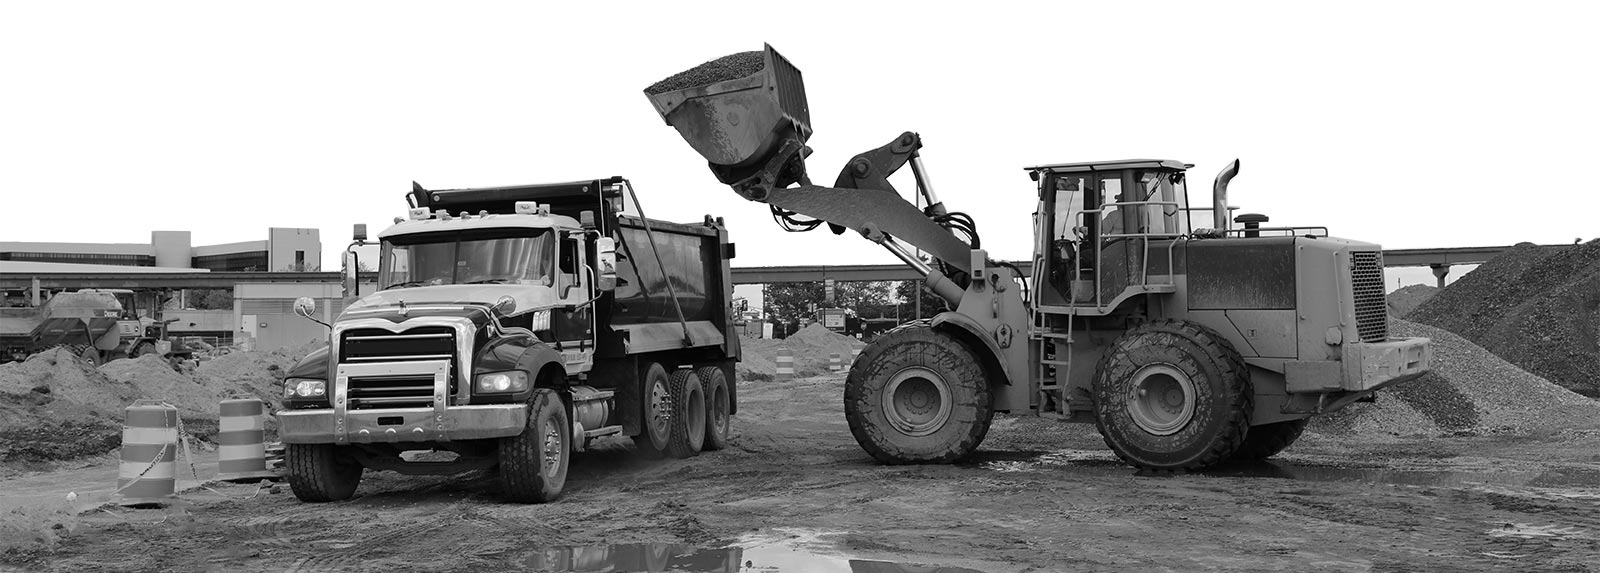 Equipment Tracking Solution and Equipment Utilization on Heavy Equipment on a Construction Site